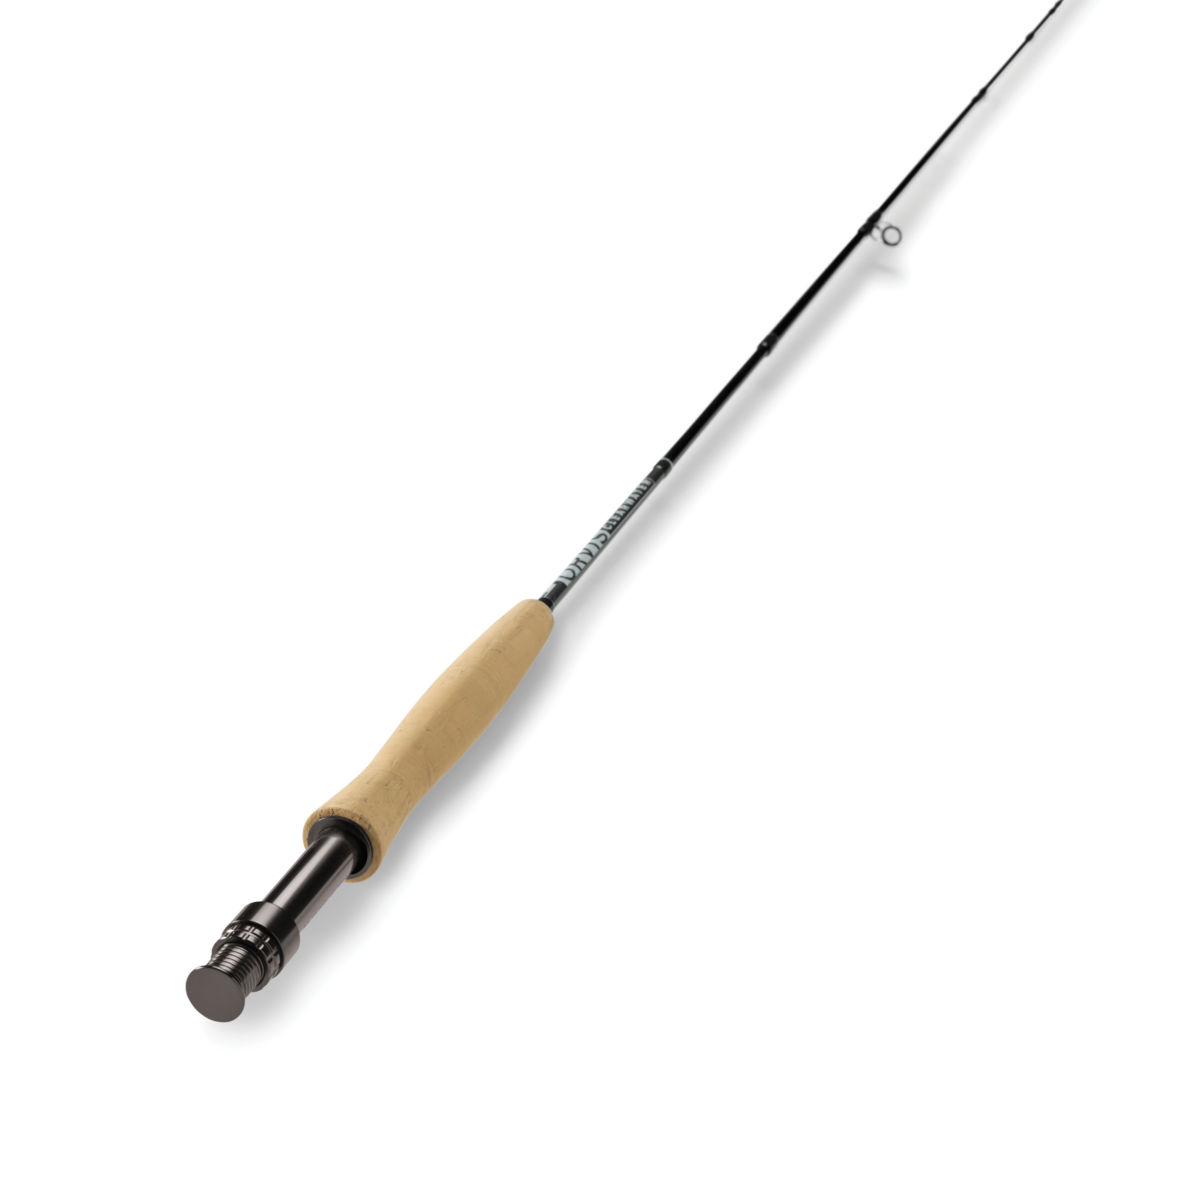 2019 Orvis Clearwater 905-4 Fly Rod Outfit 9'0" 5wt 